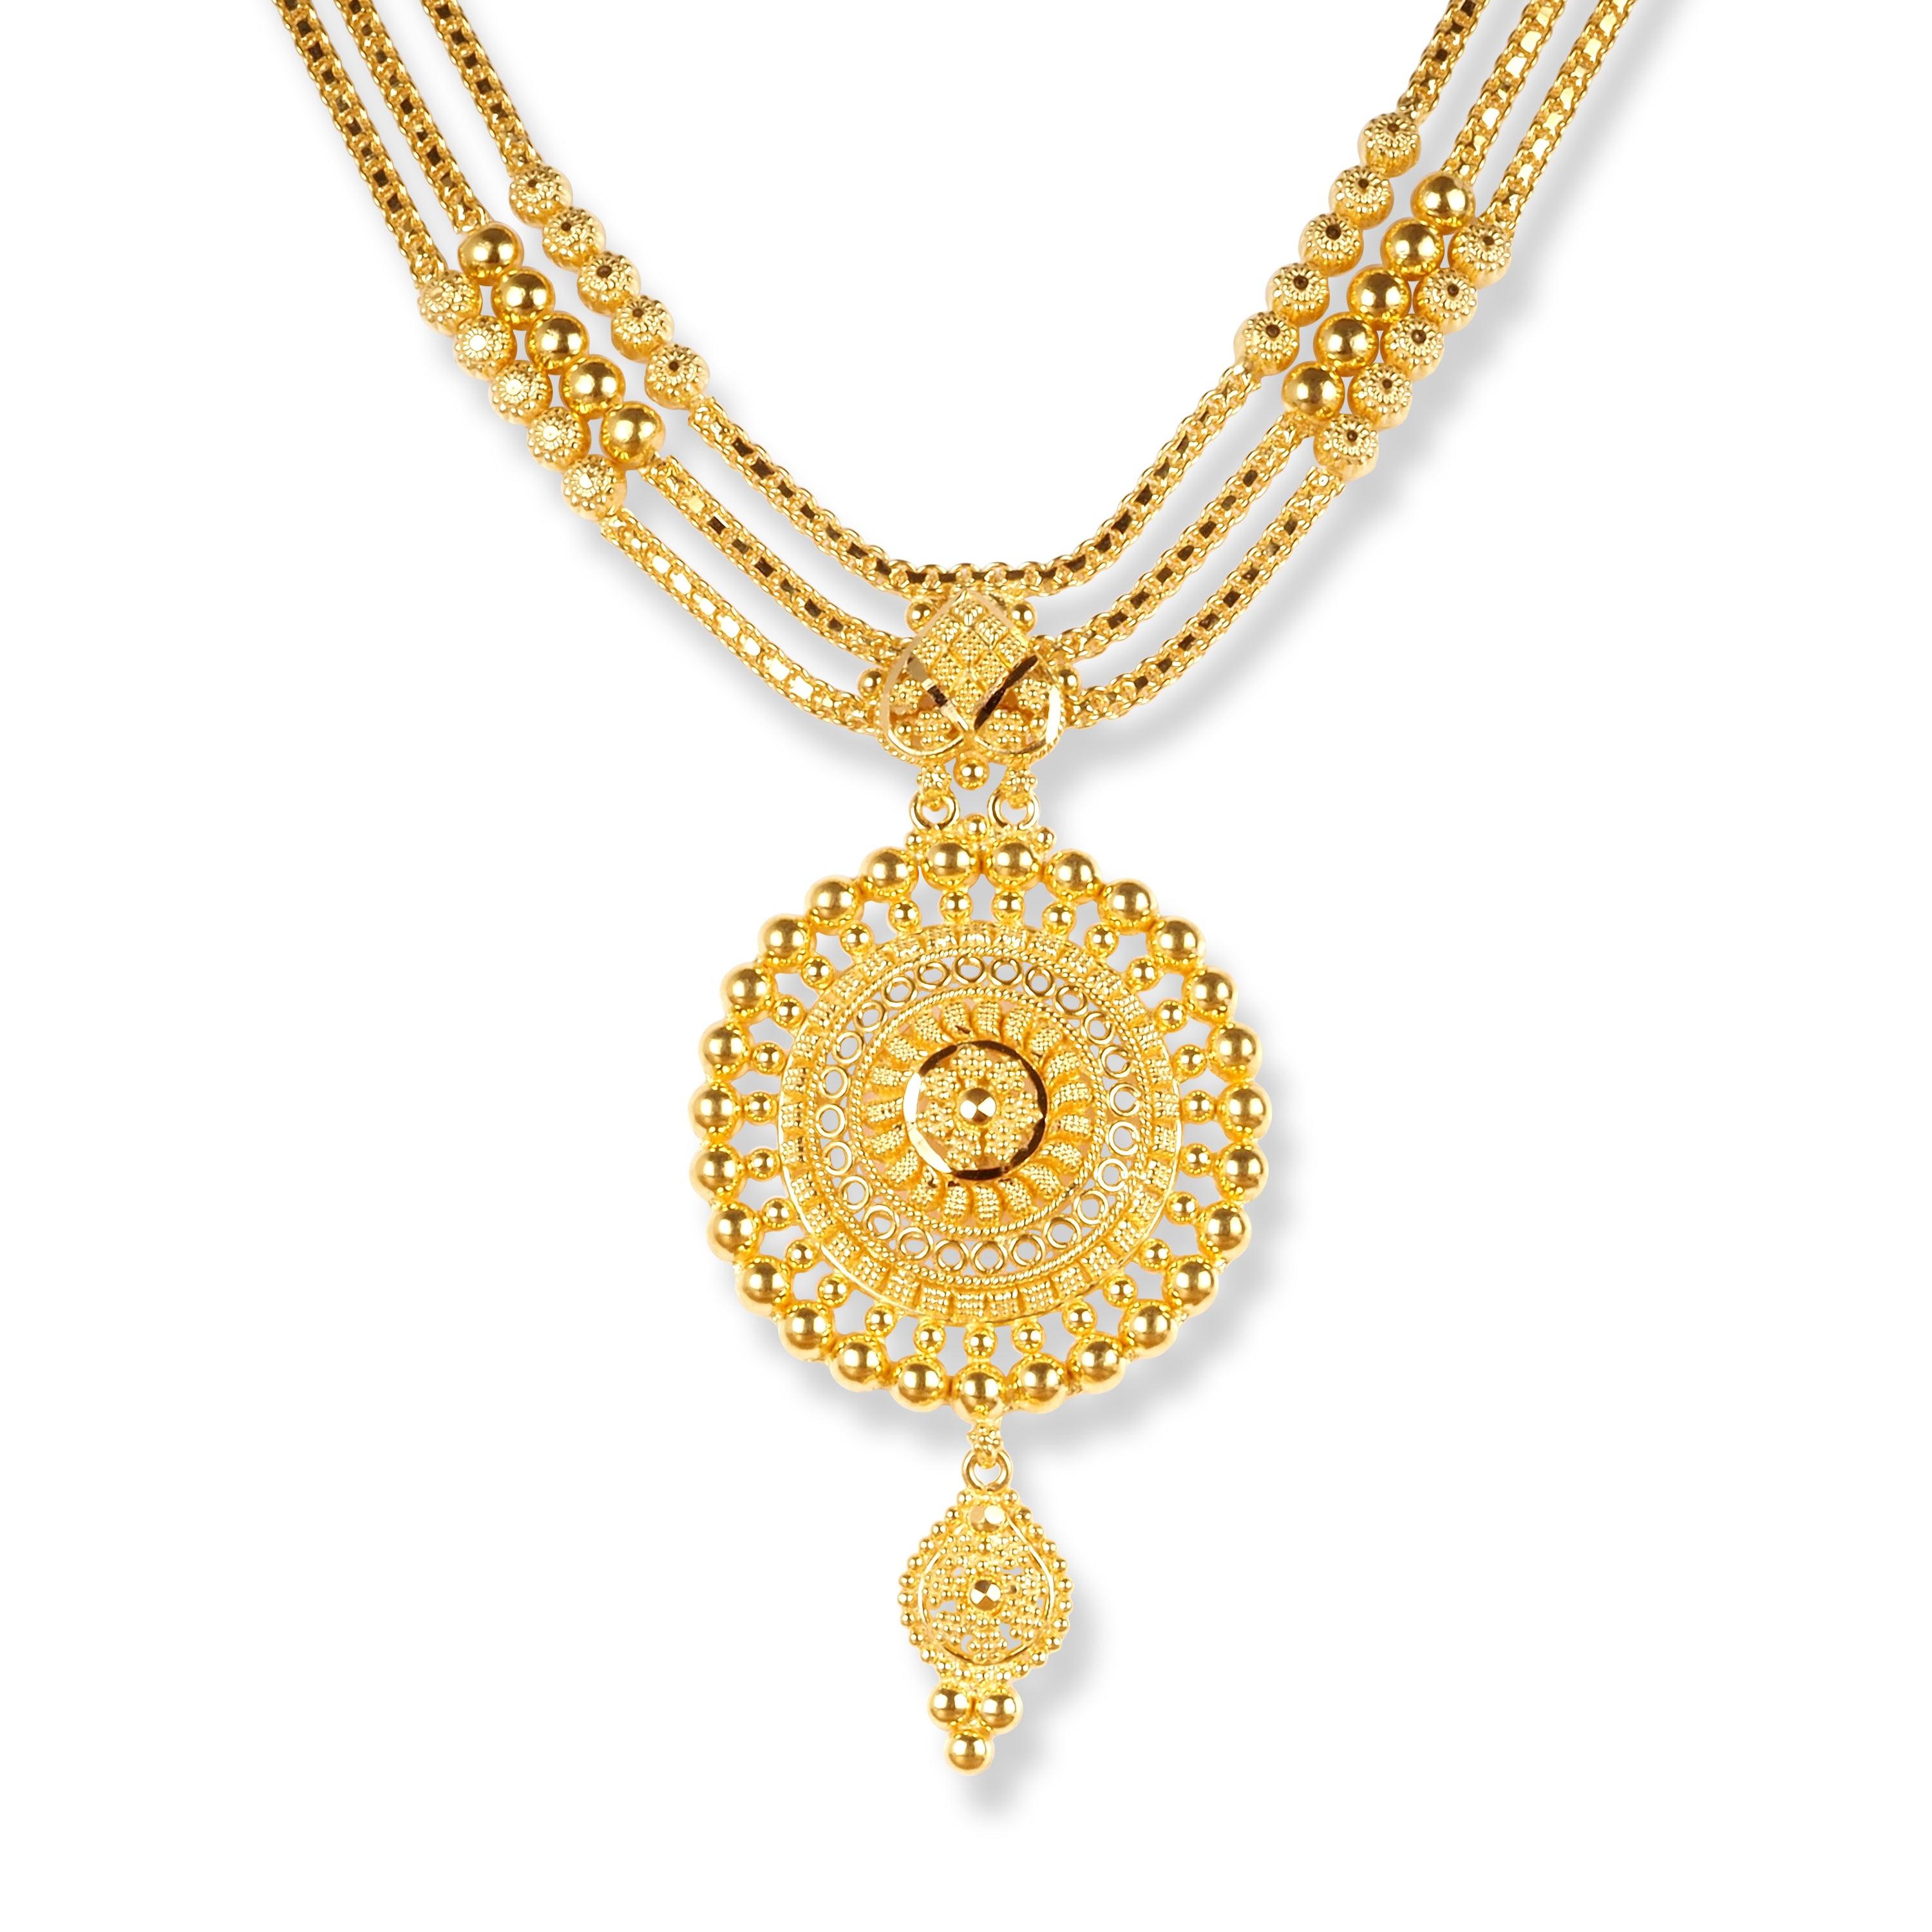 22ct Gold Three Row Necklace Set With Beaded Design - N7927 - Minar Jewellers